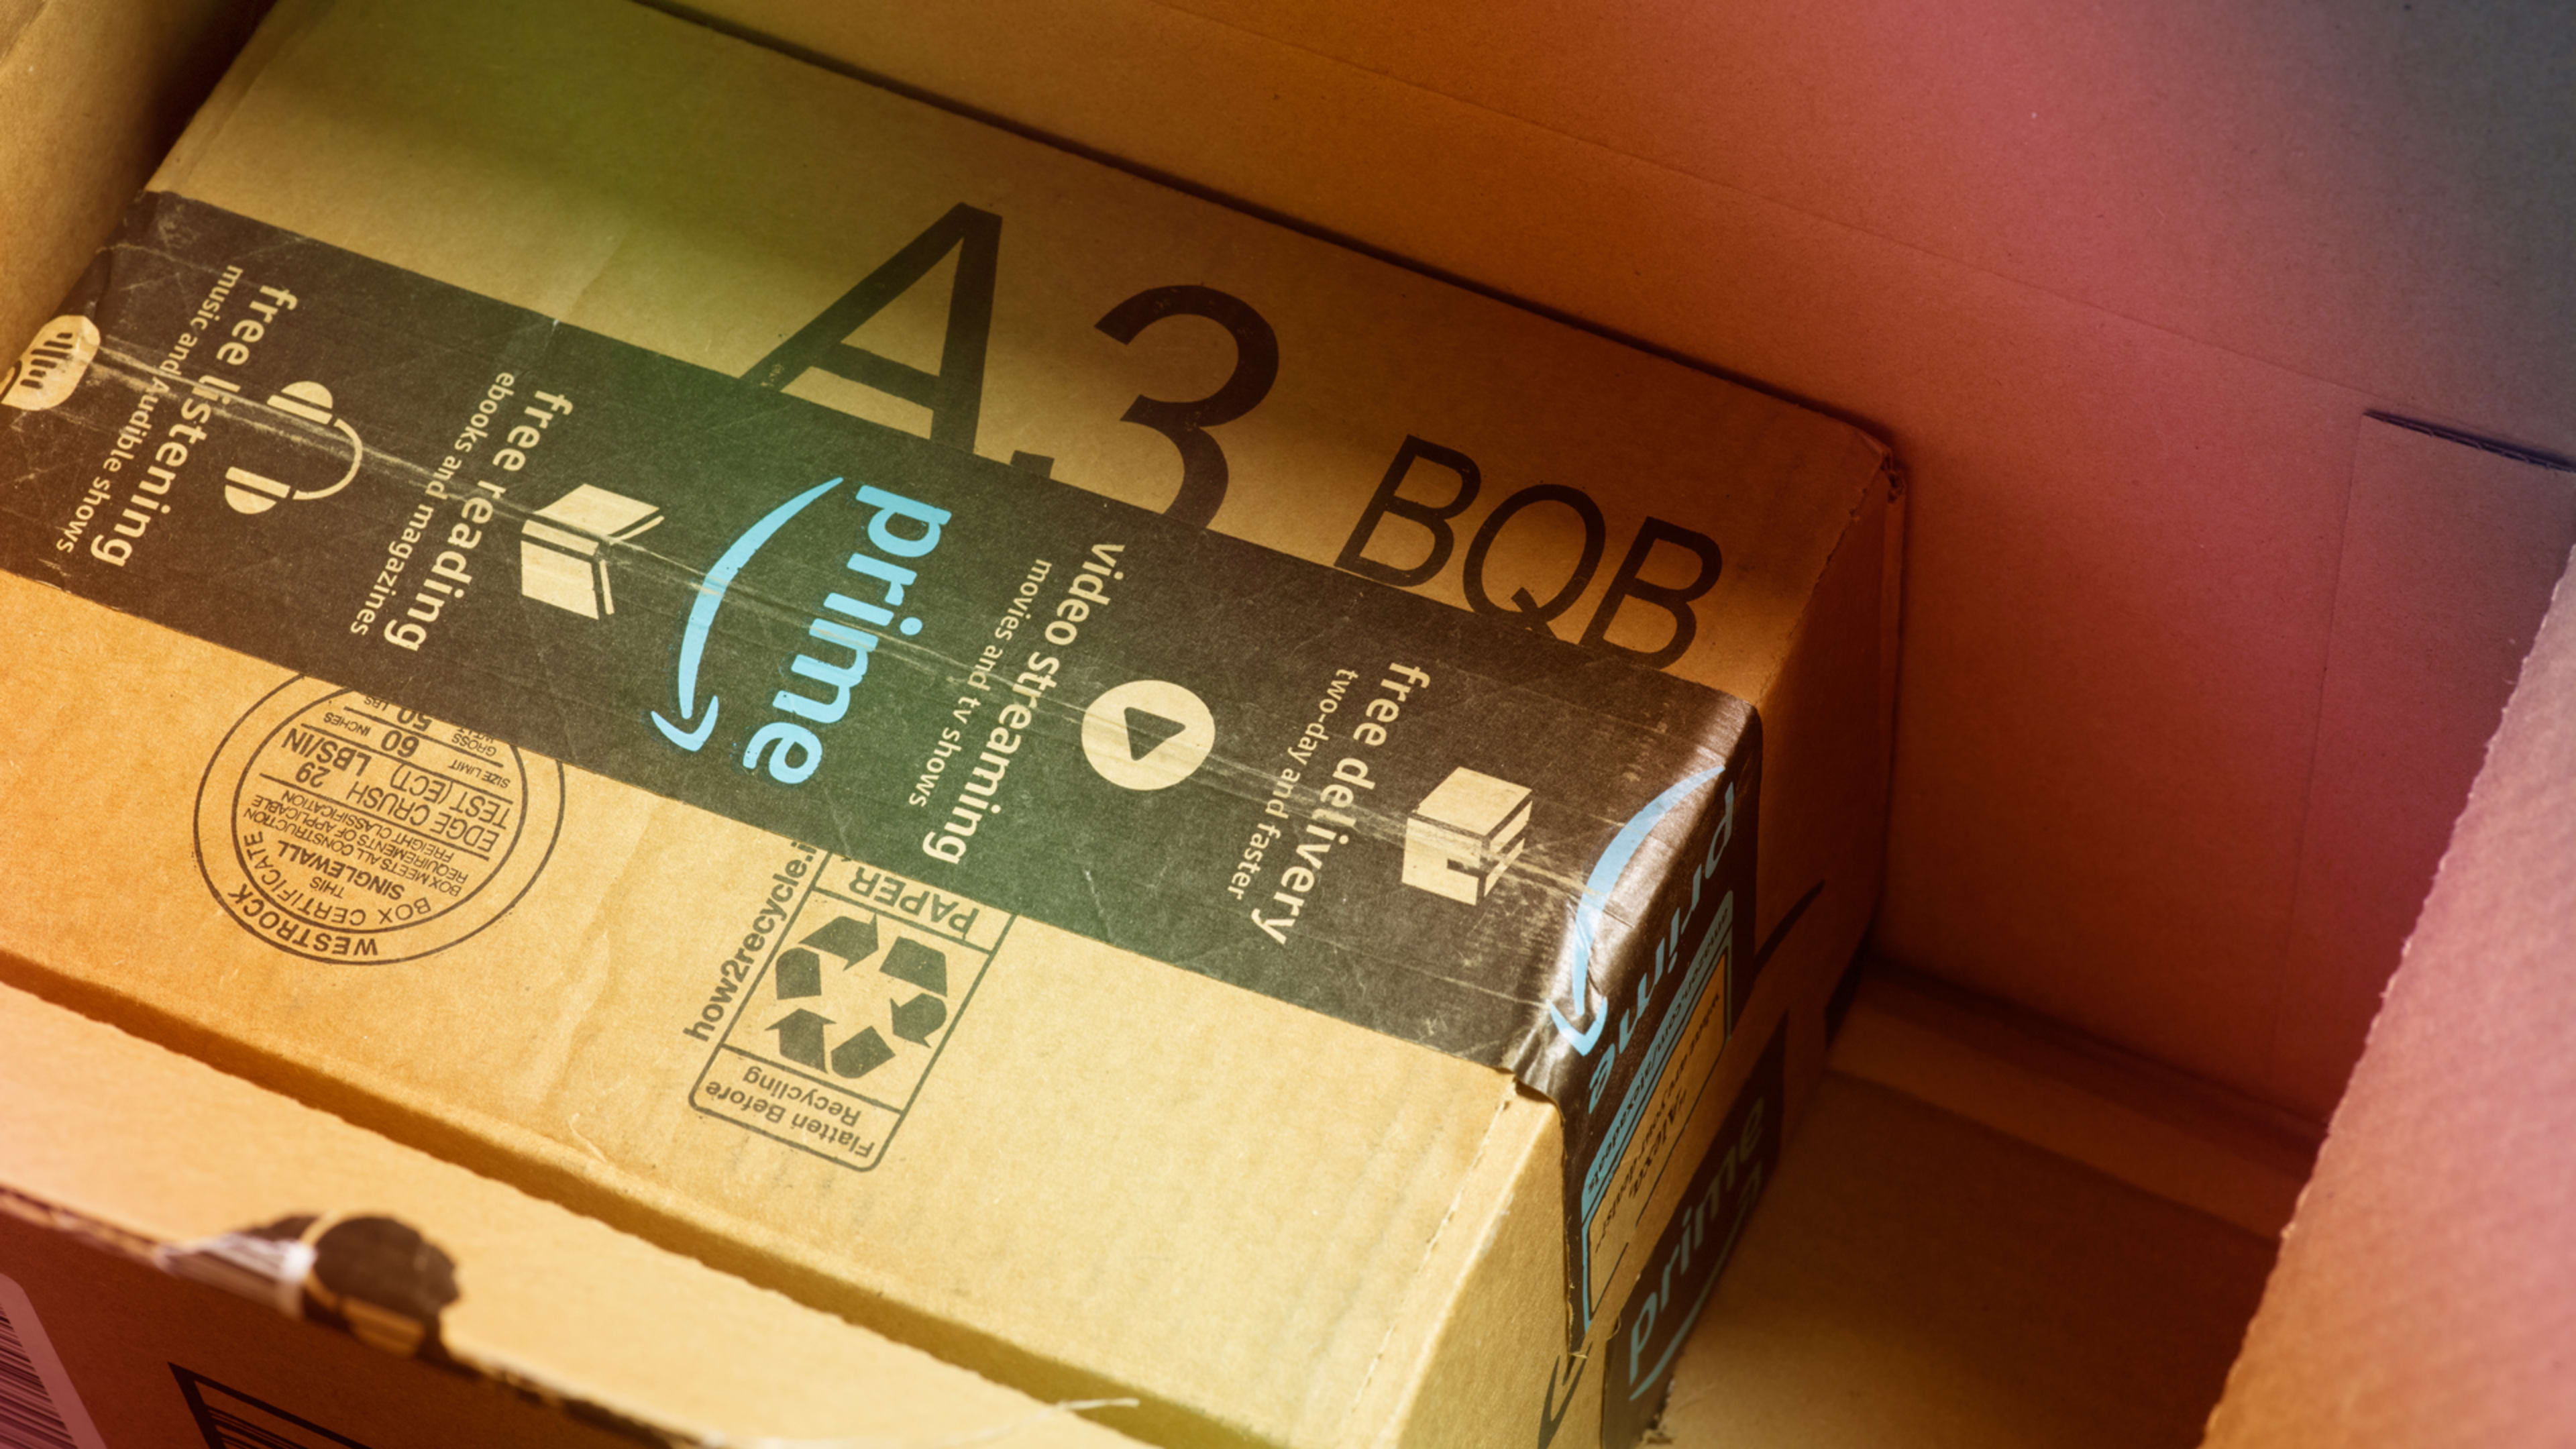 Amazon is testing a ‘new’ badge to help shoppers identify new products